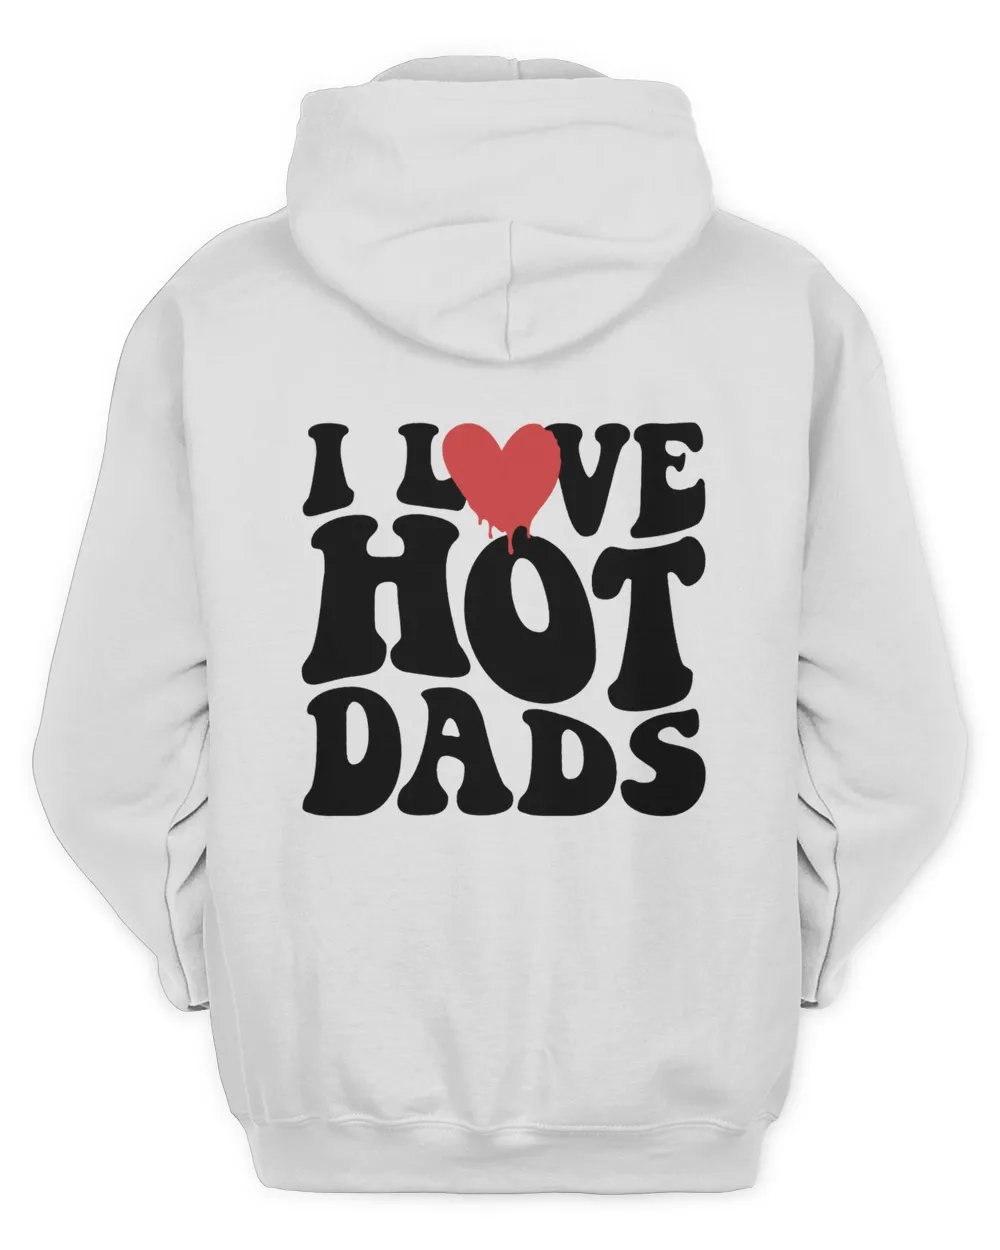 Hot Dads Graphic Hoodie, I Love Hot Dads Hoodie